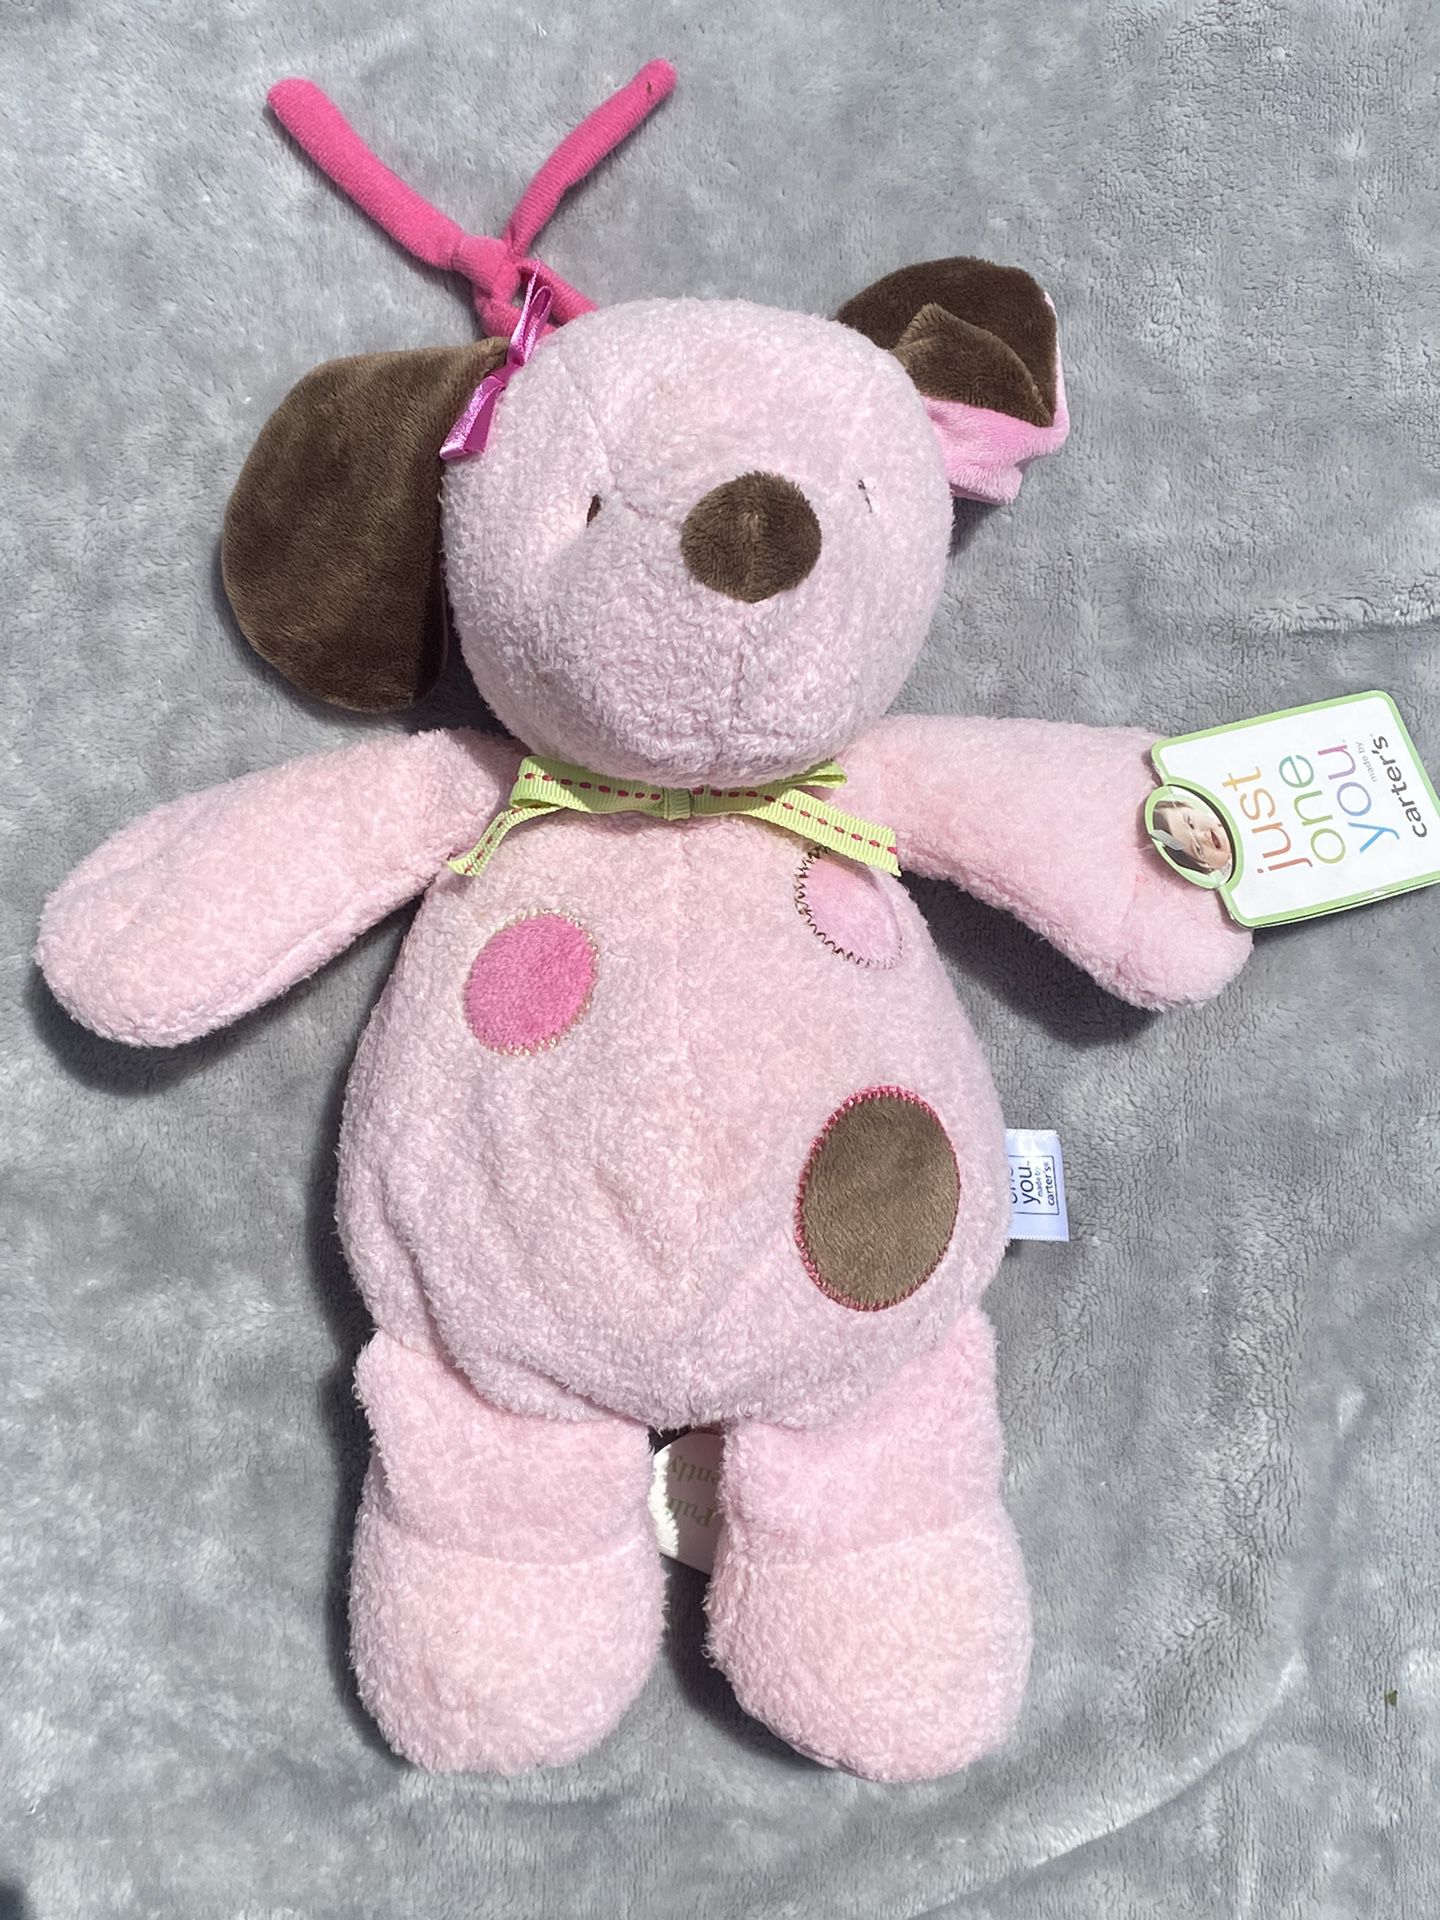 Carters Puppy Dog Pink Brown Spot Musical Crib Pull Plush Stuffed Animal Toy new